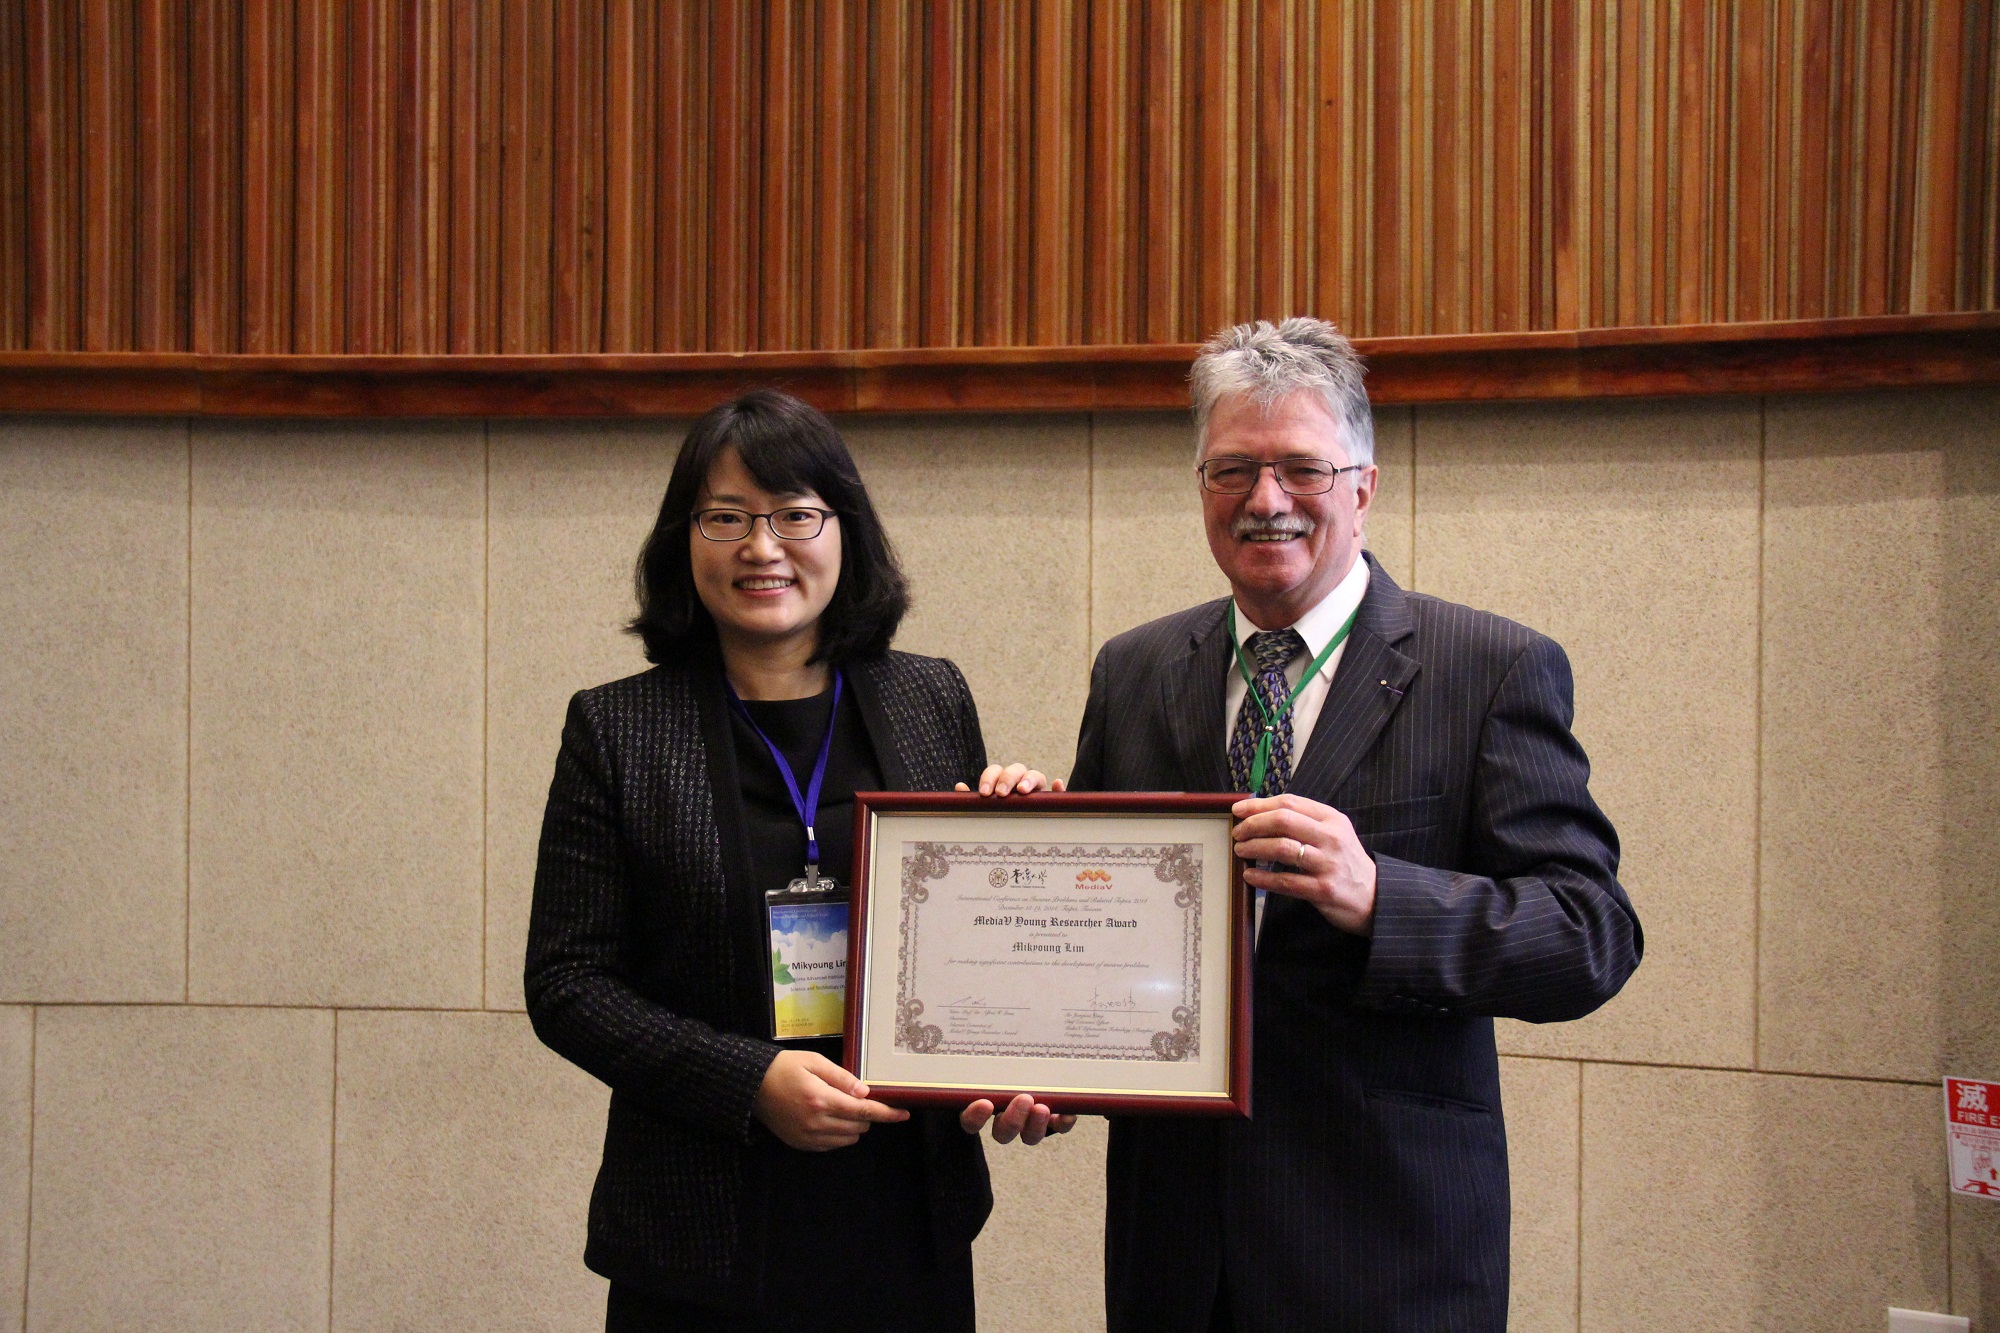 Professor Mikyoung Lim Receives the MediaV Young Researcher Award 이미지